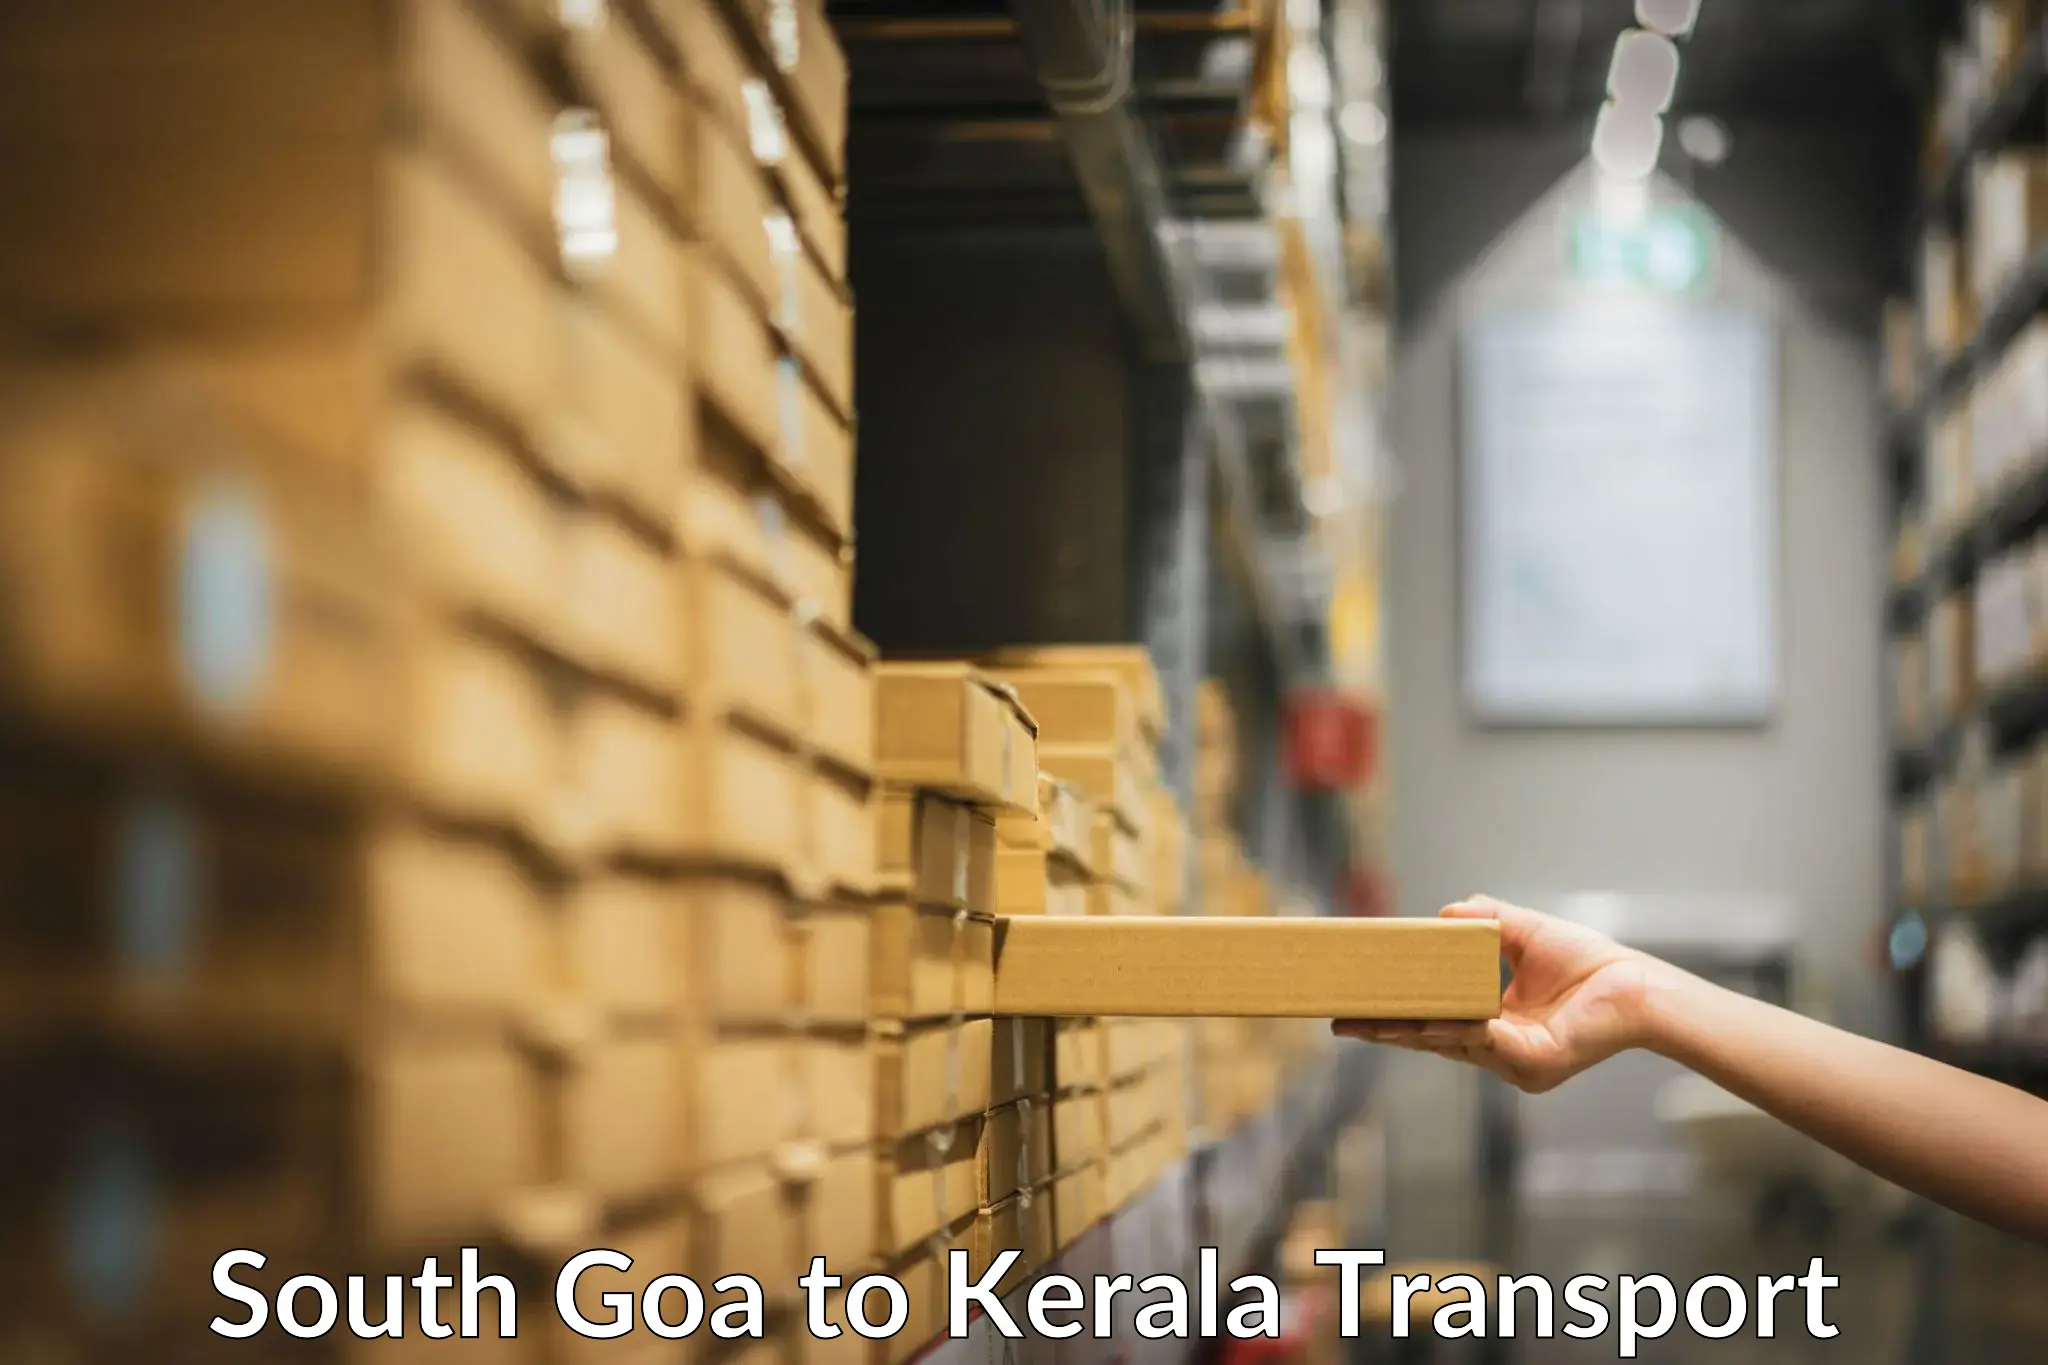 Nearby transport service South Goa to Kunnamkulam